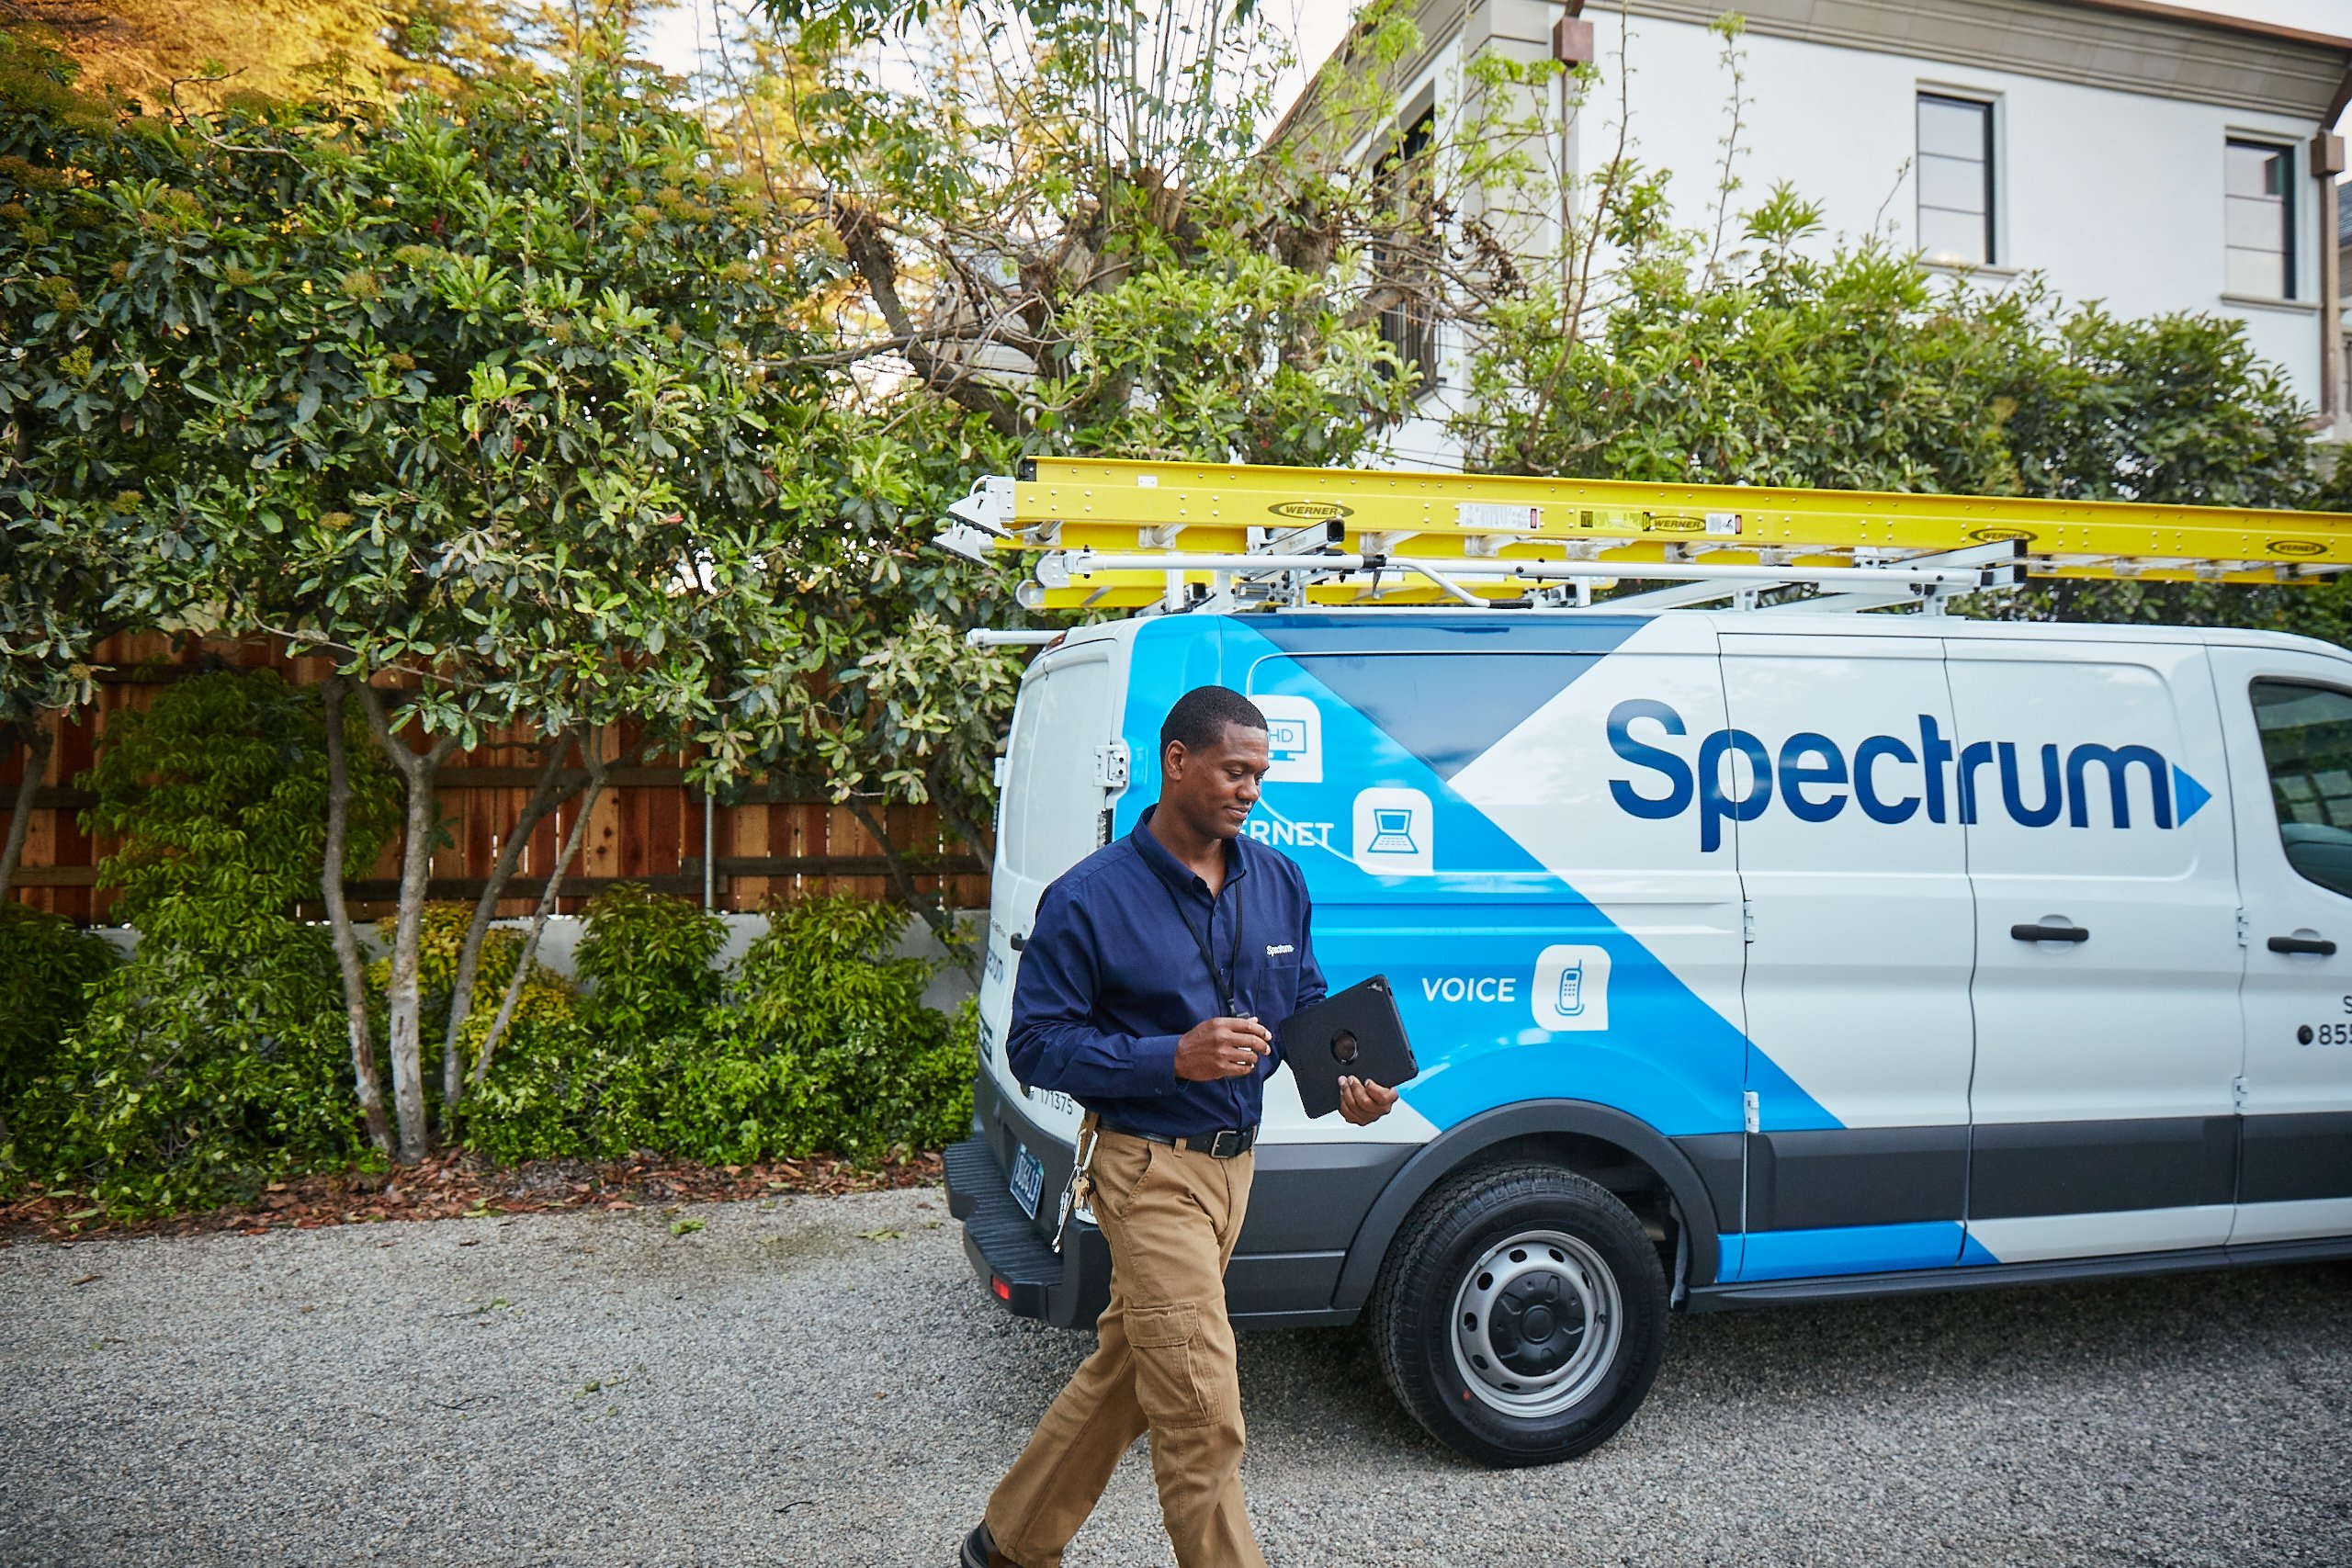 How To Transfer Your Spectrum Services When Moving?